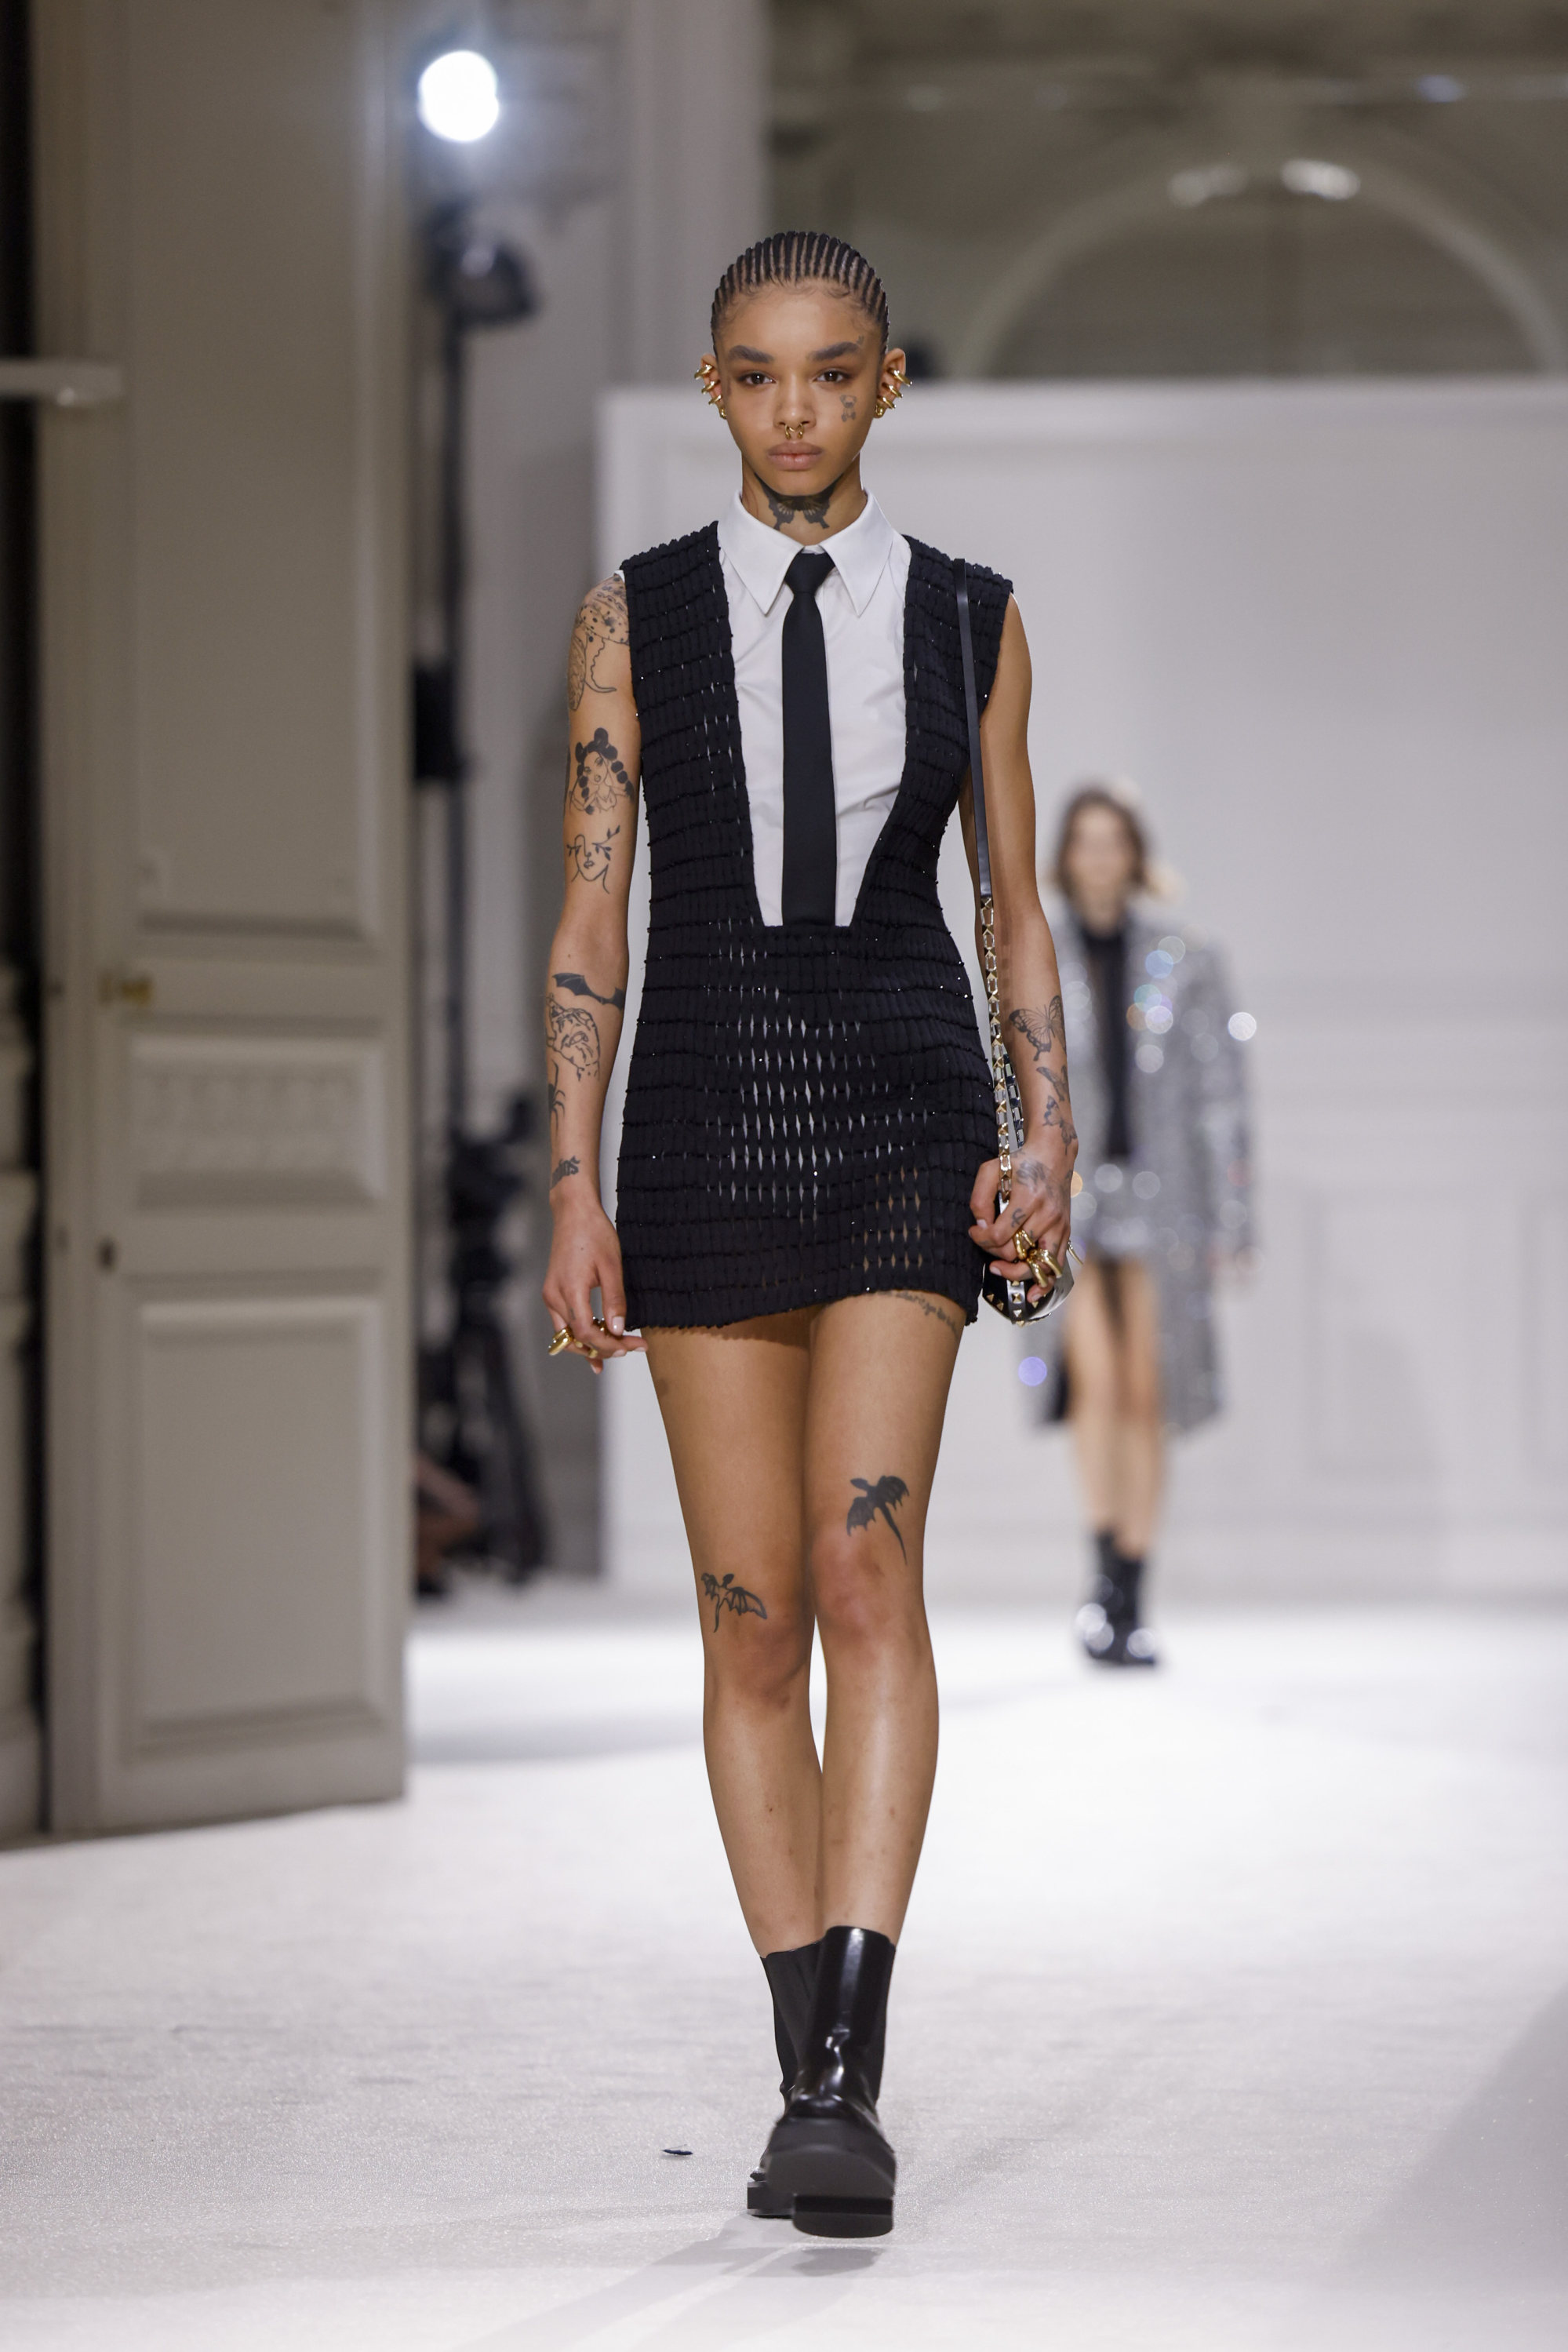 Look sharp! Shoulder pads and spikes are back as Paris calls time